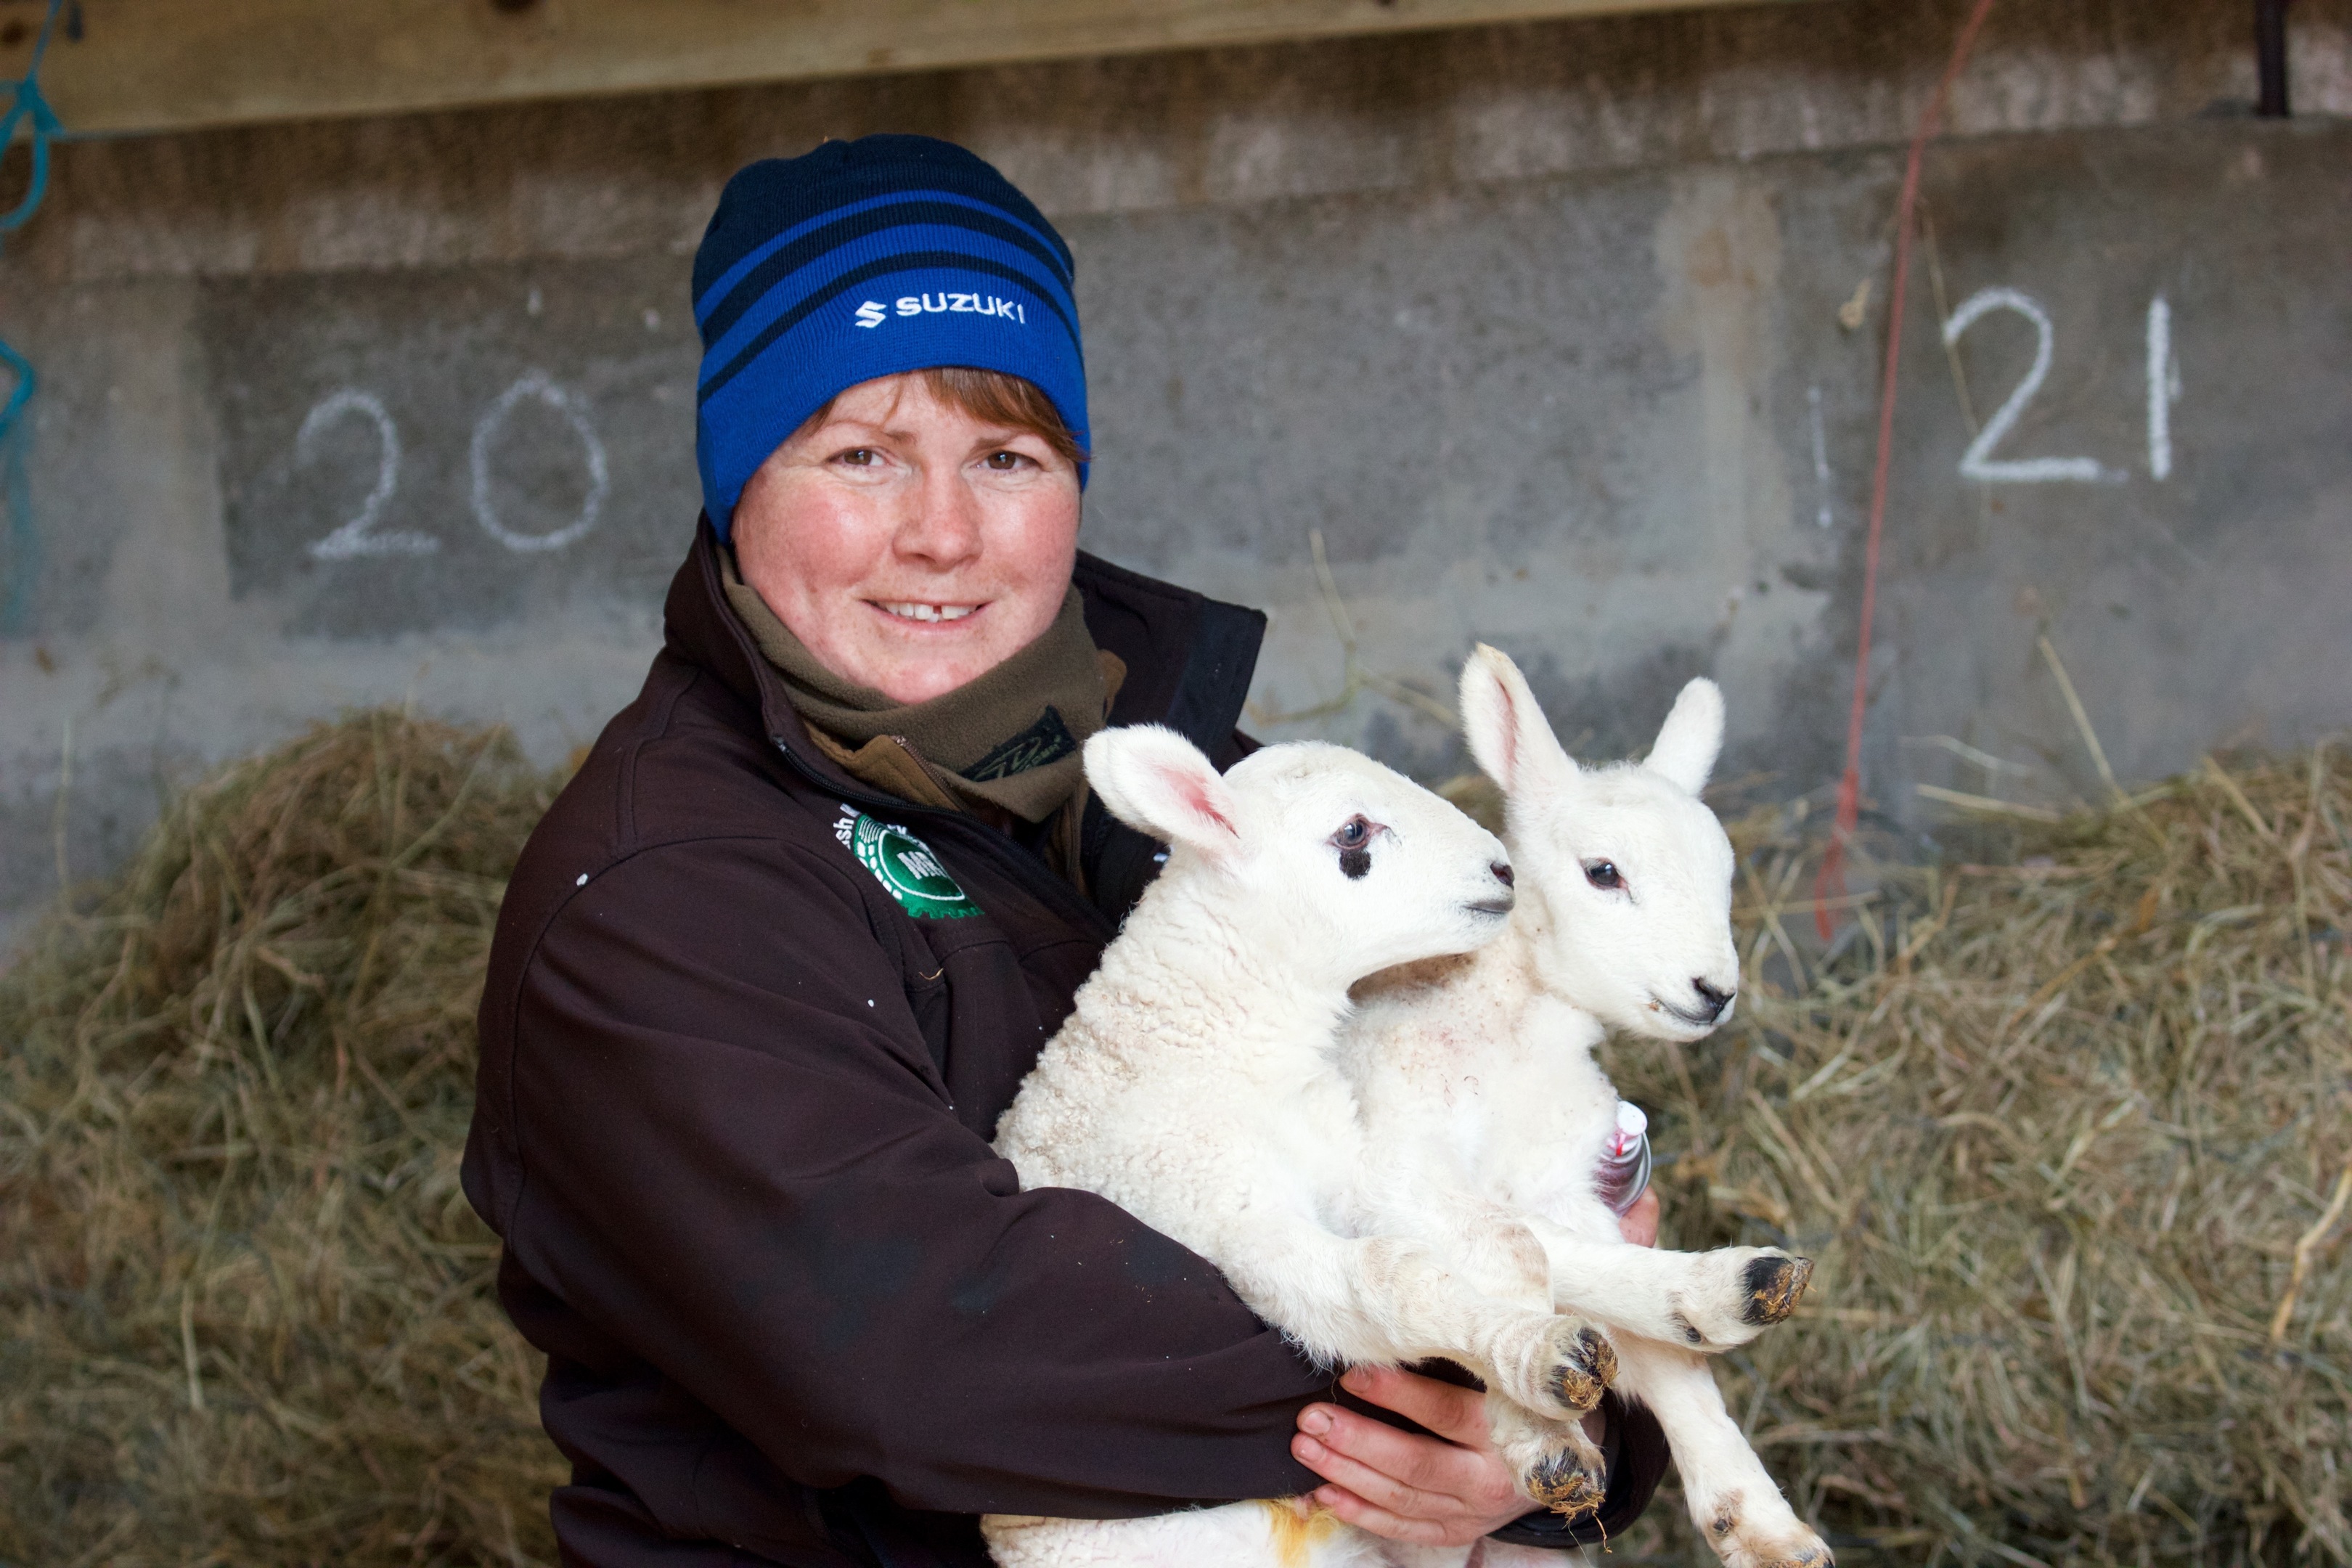 Childcare, busy lives and lack of time limit women’s engagement in farm leadership